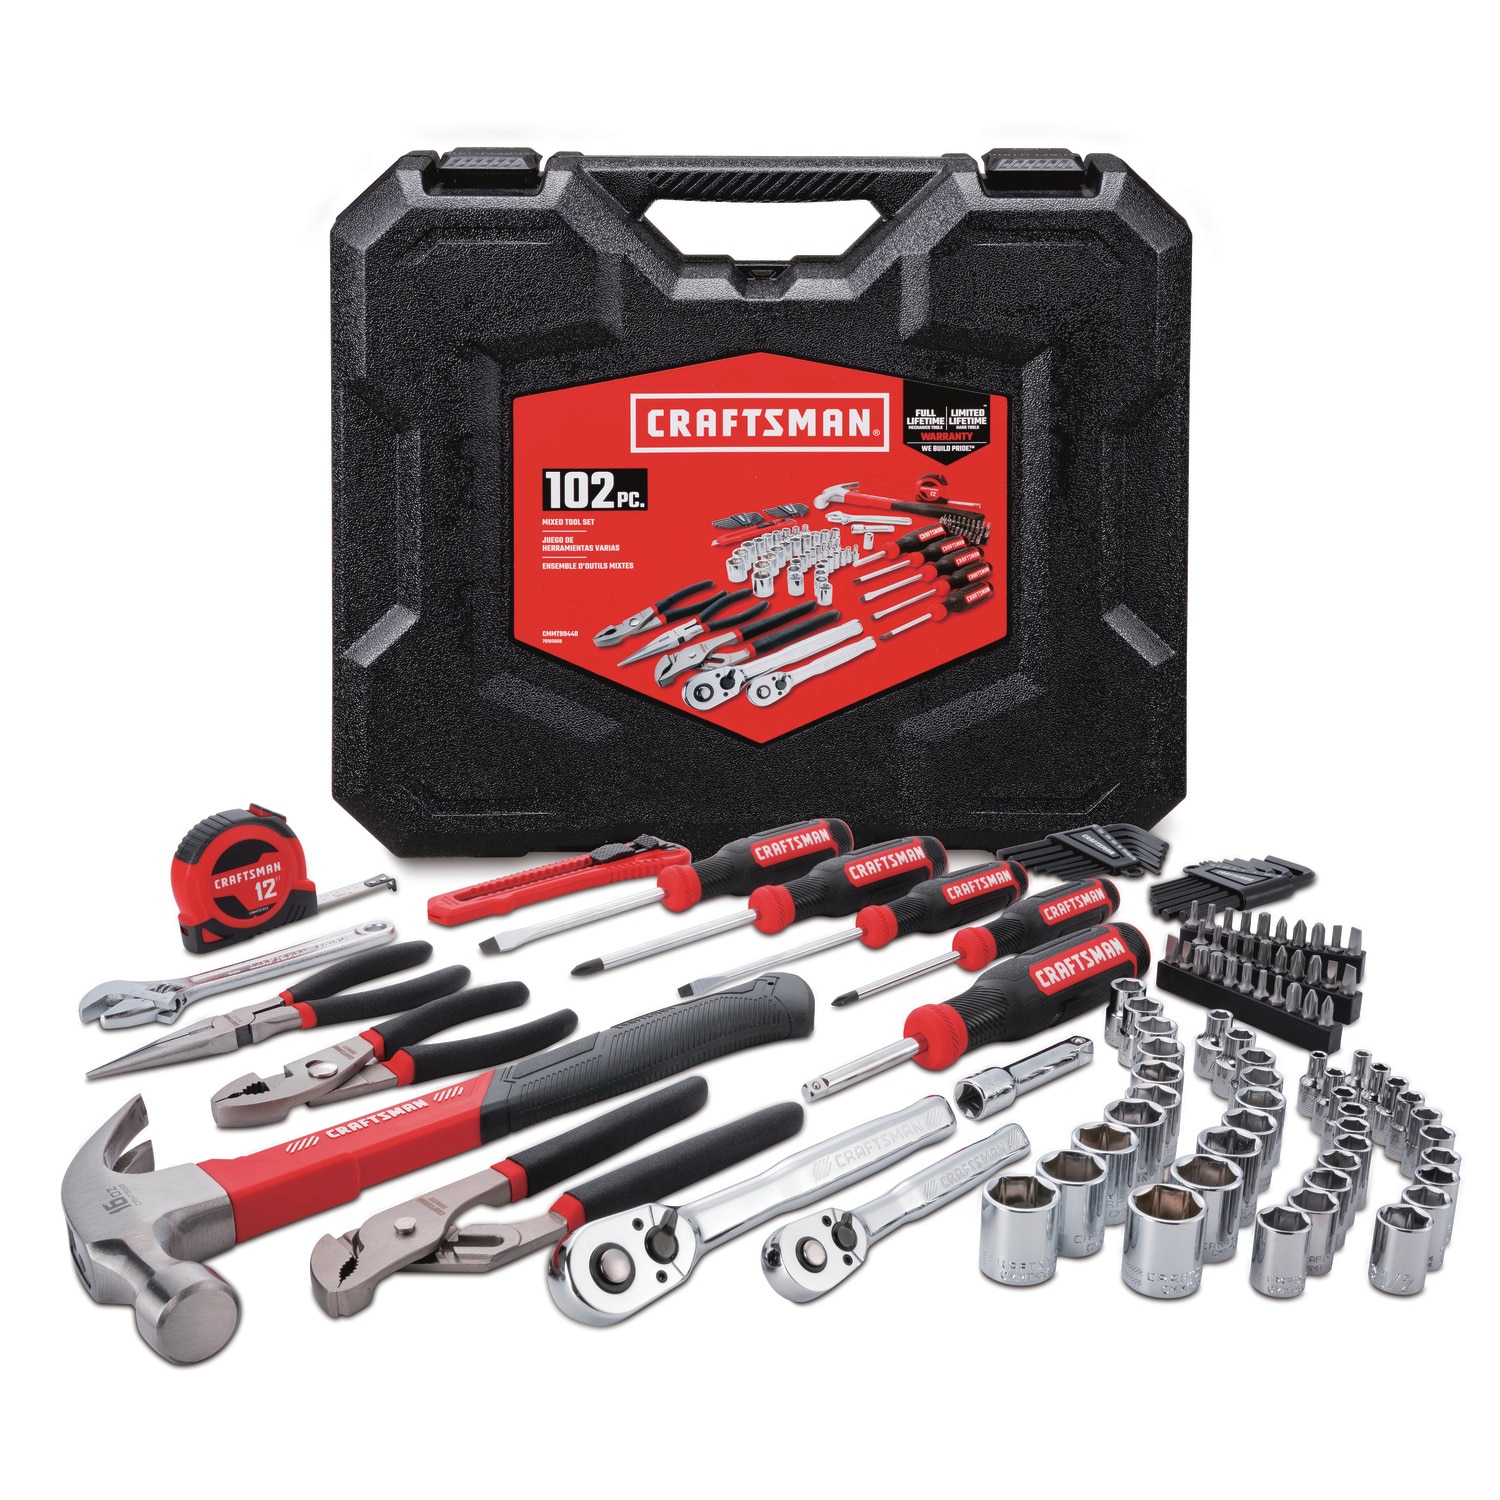 can you still buy craftsman tools?